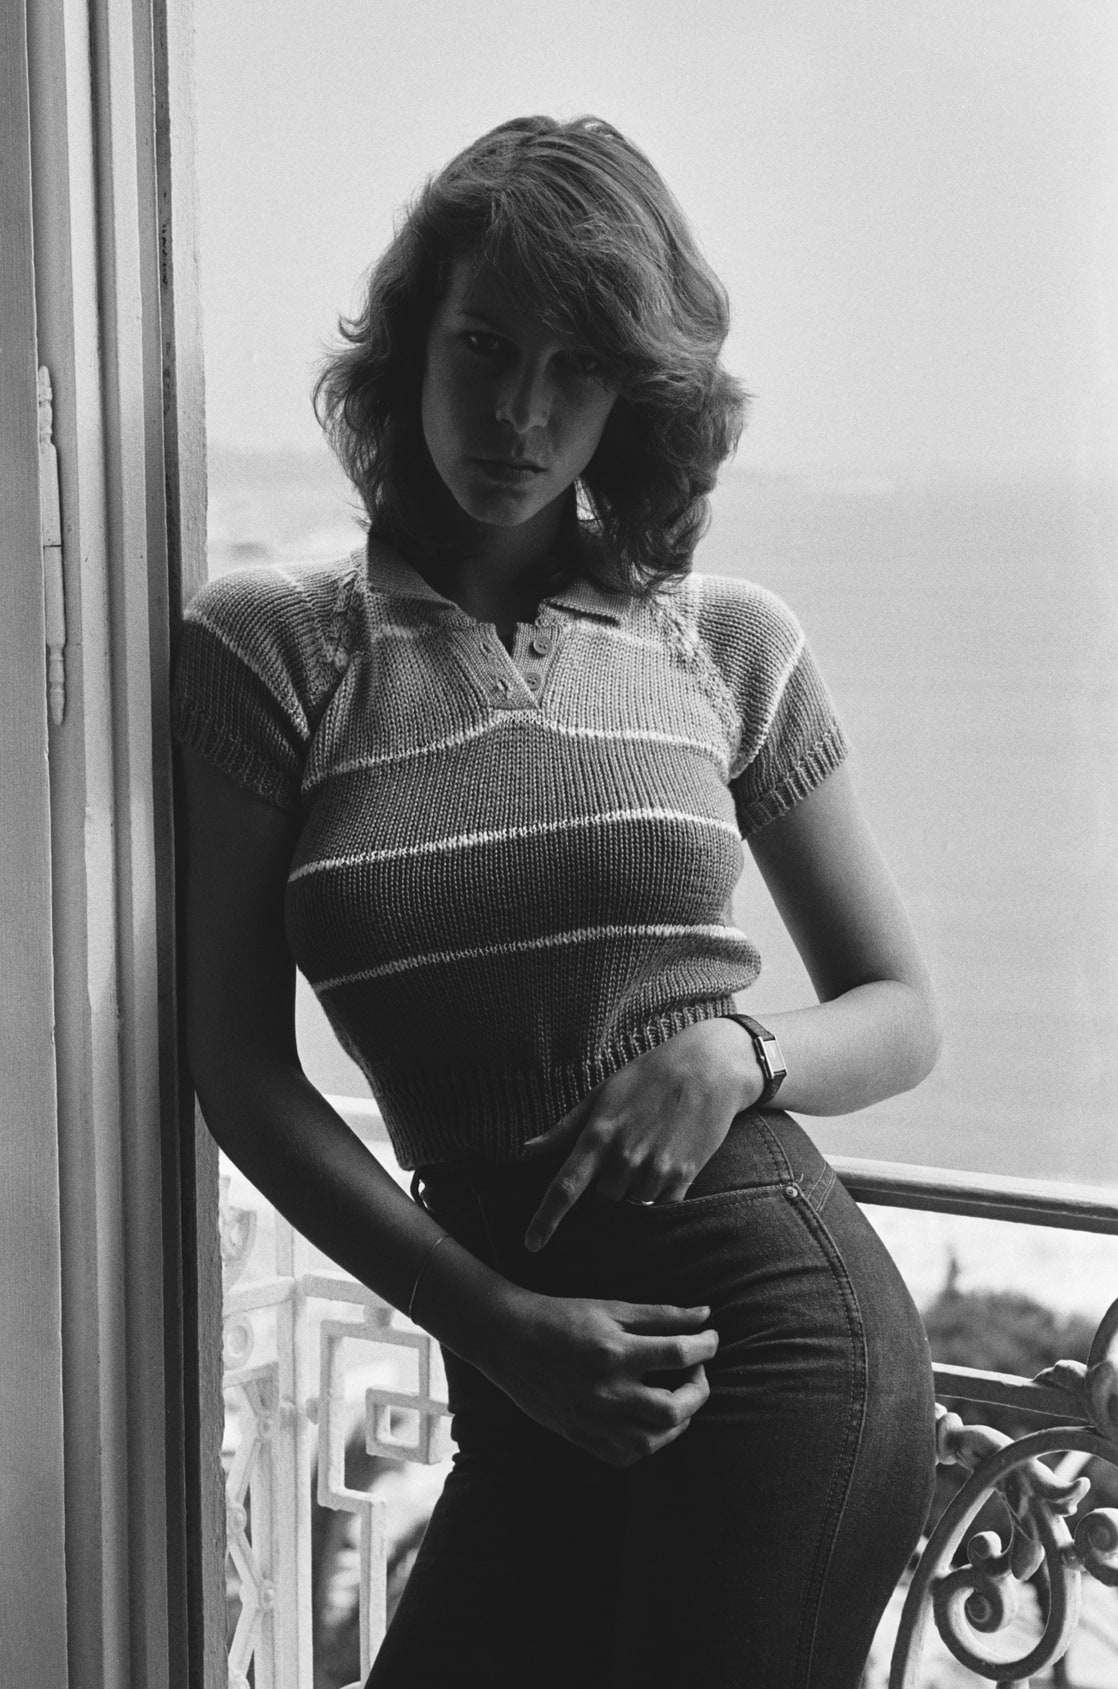 Picture Of Jamie Lee Curtis